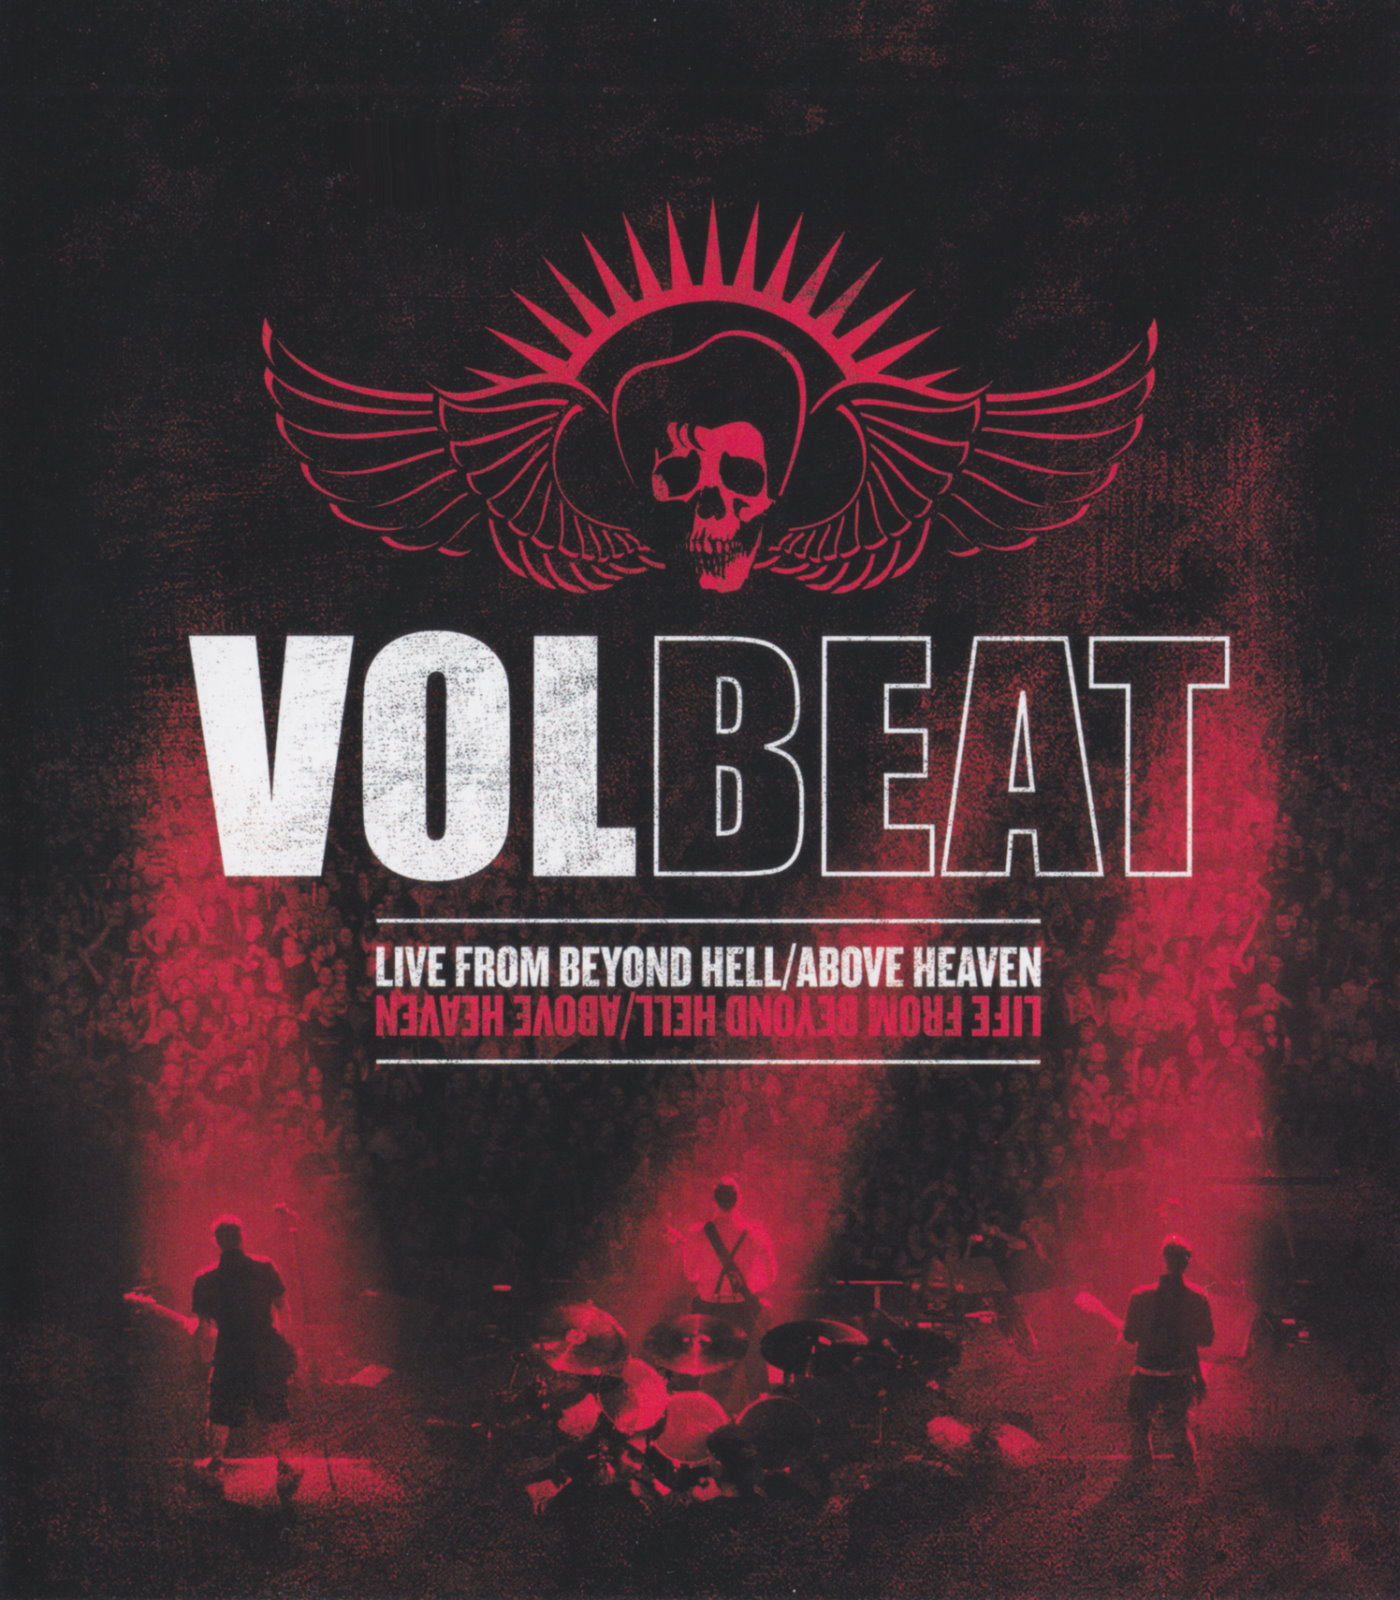 Cover - Volbeat - Live from Beyond Hell / Above Heaven.jpg